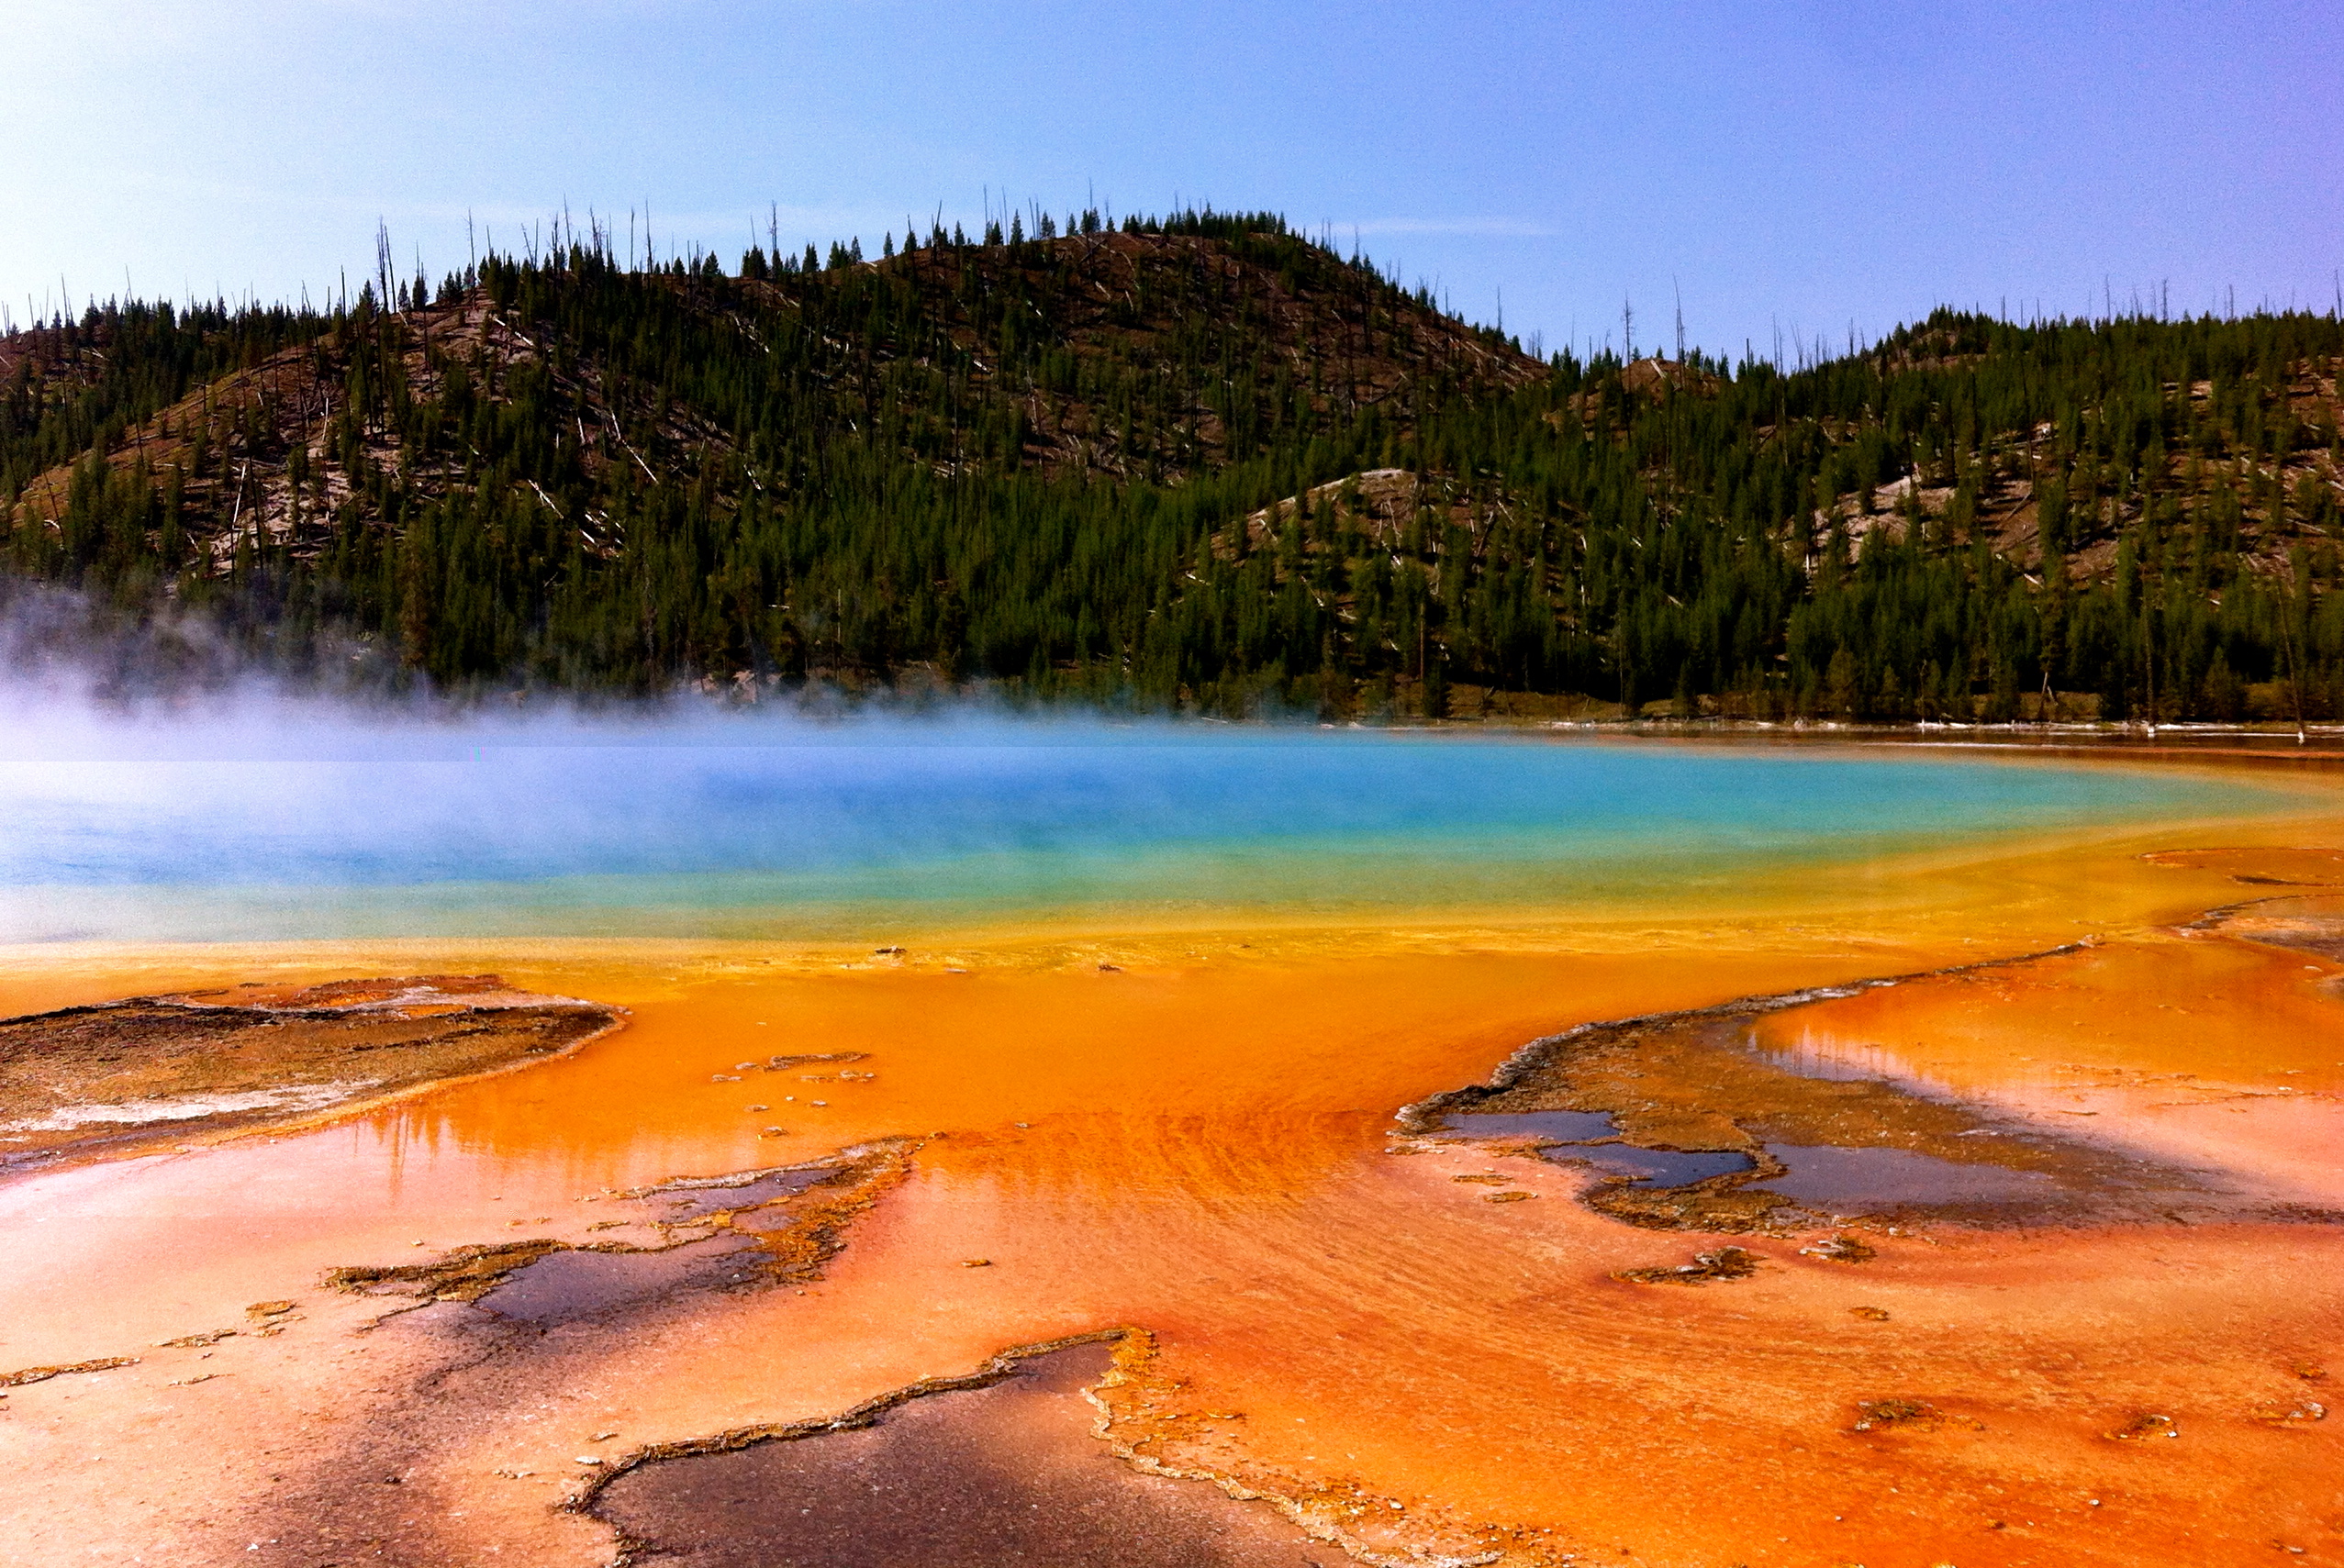 The amazing Grand Prismatic Spring